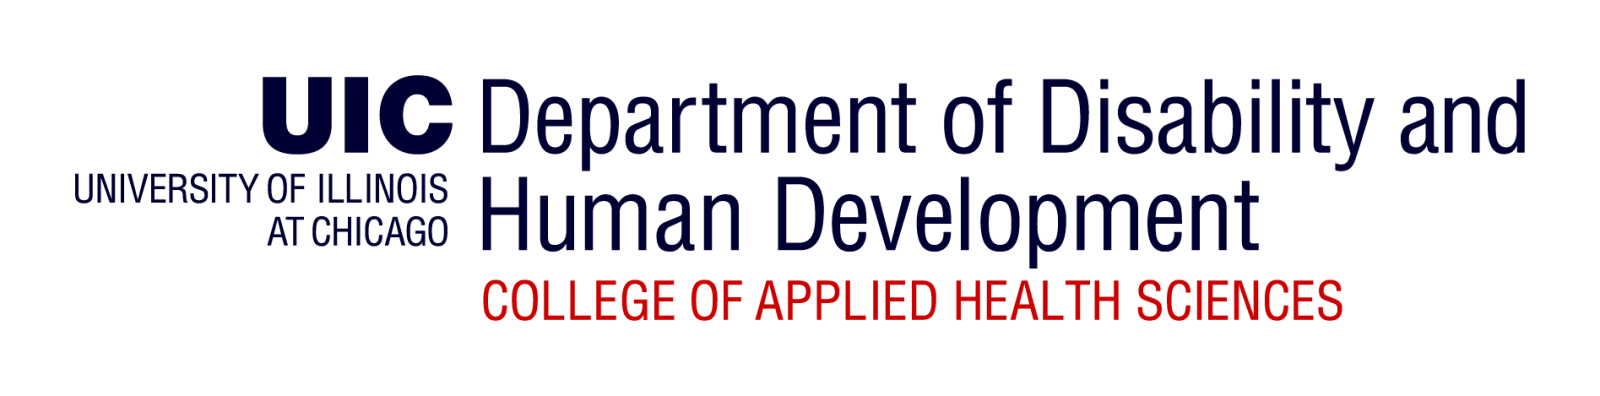 University of Illinois at Chicago, Department of Disability and Human Development, College of Applied Health Sciences